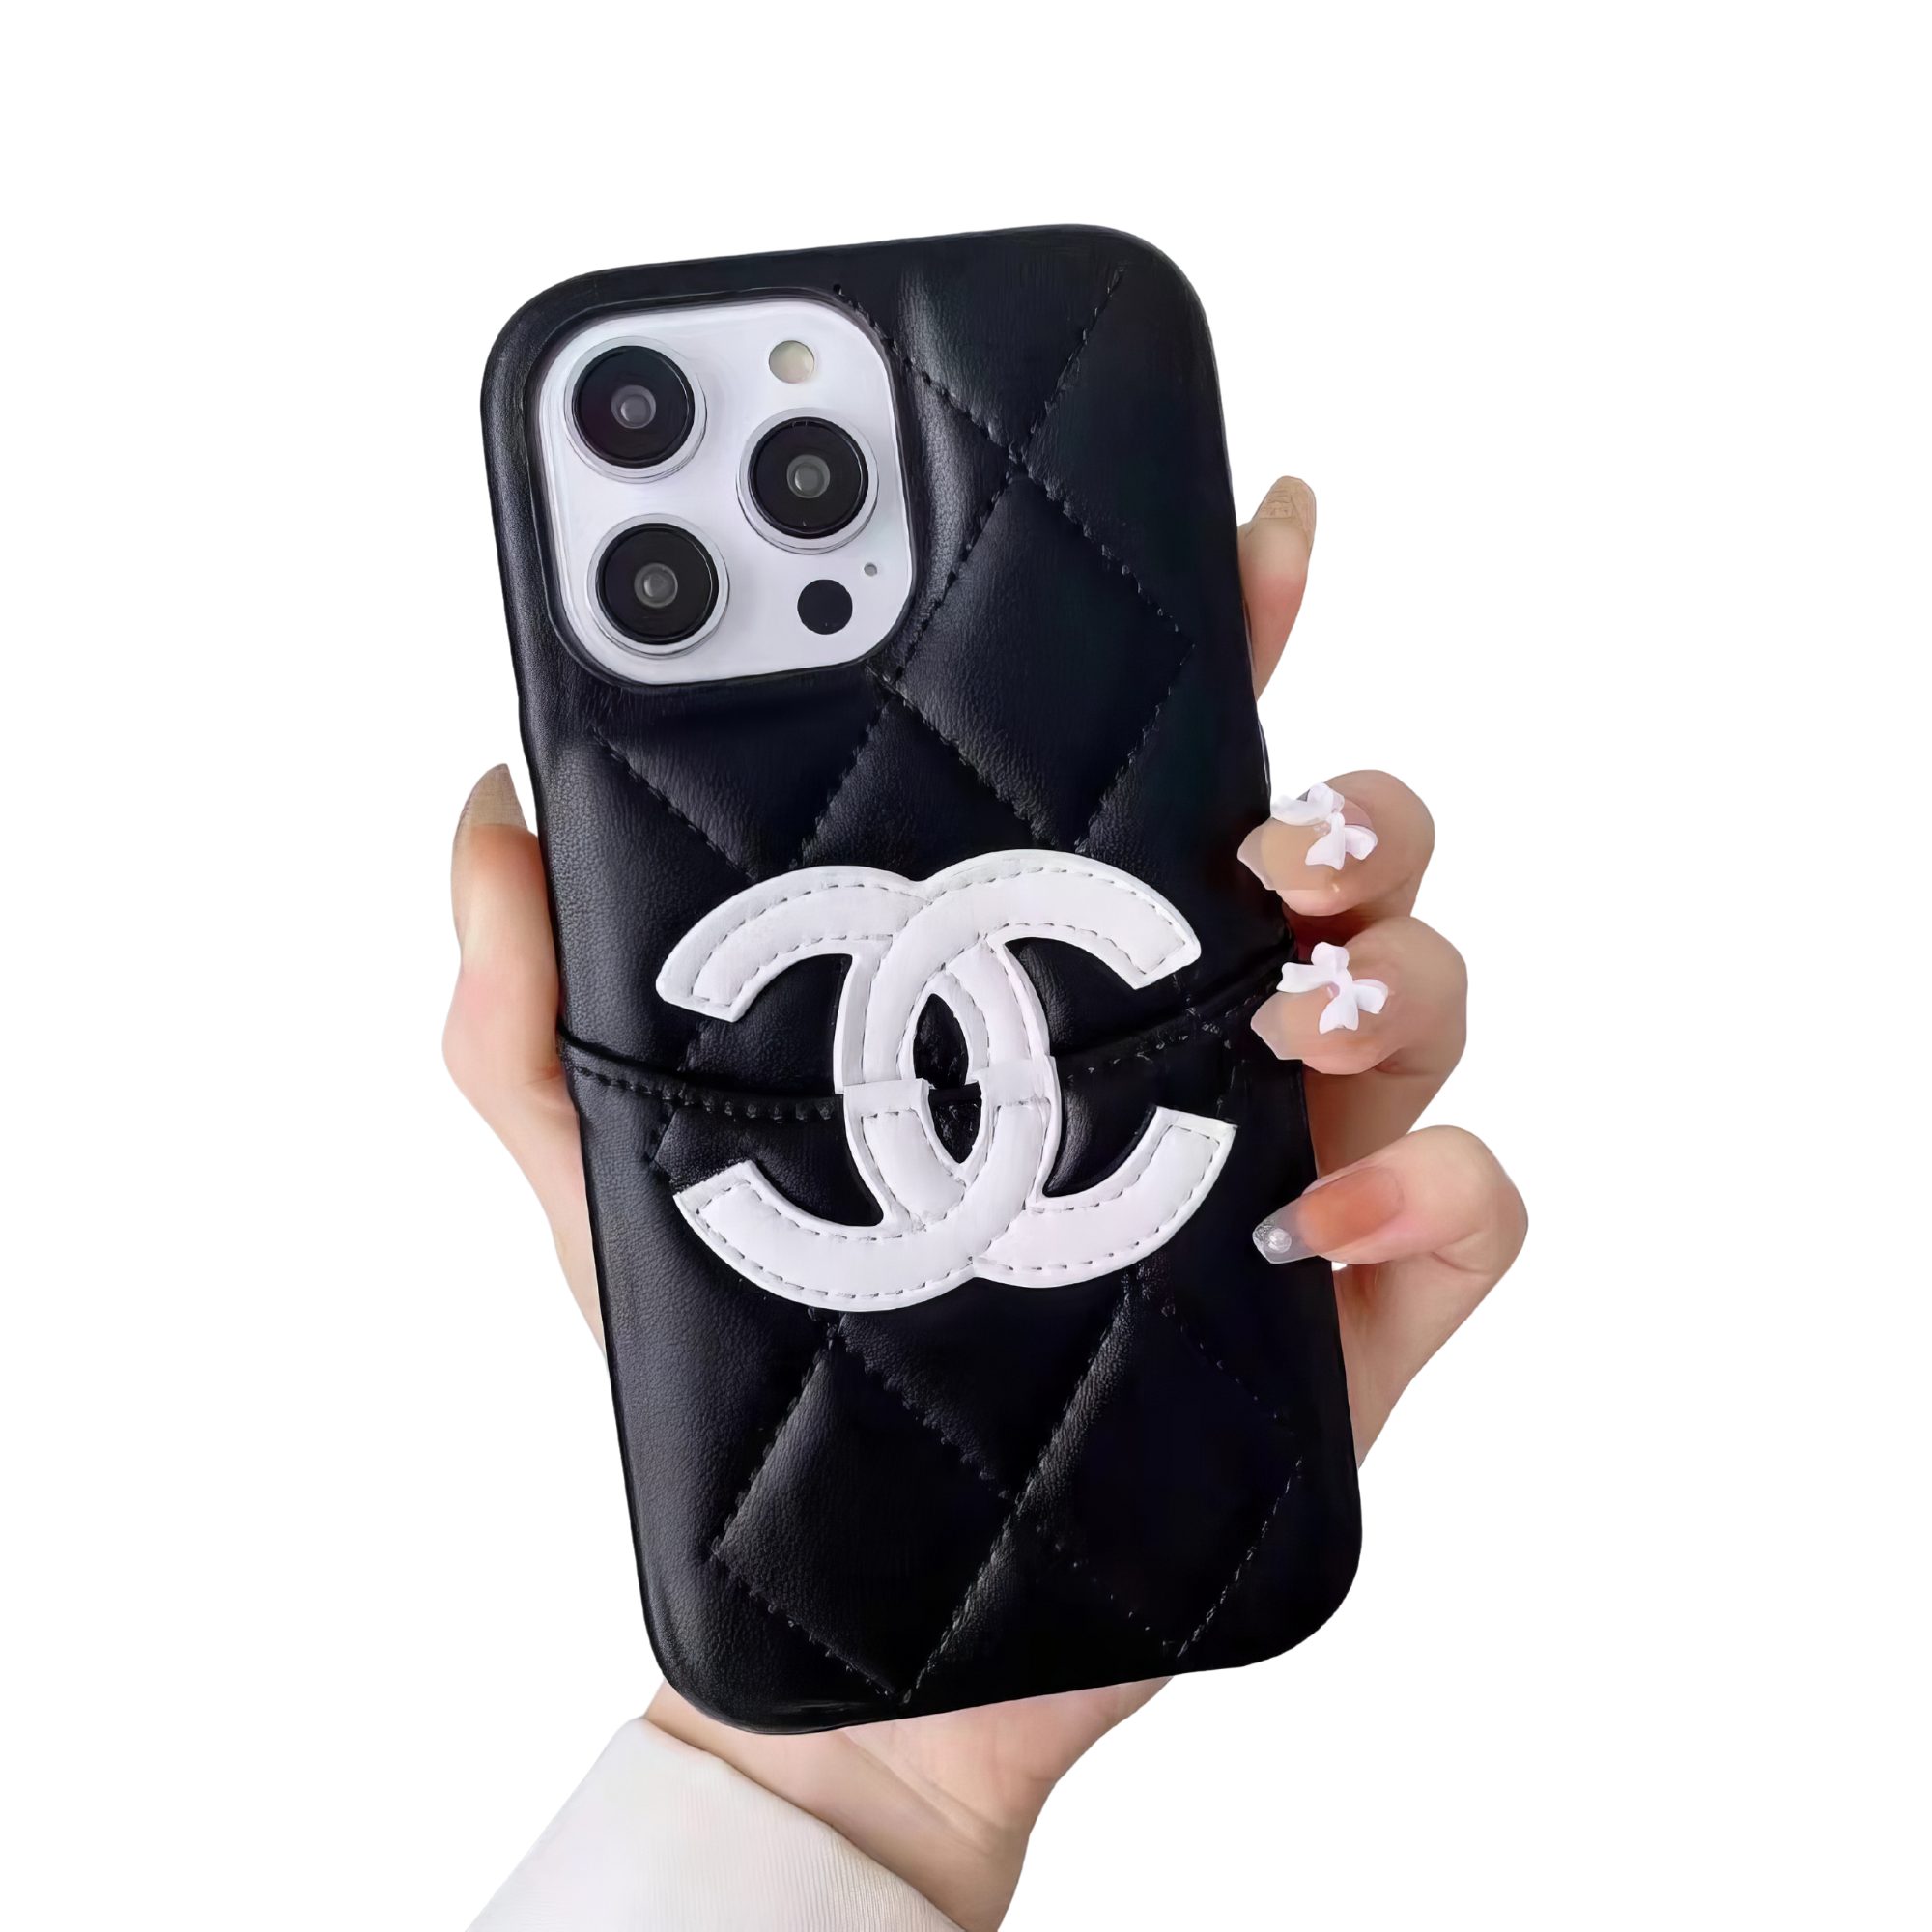 Black quilted leather phone case with white Chanel logo held in hand"